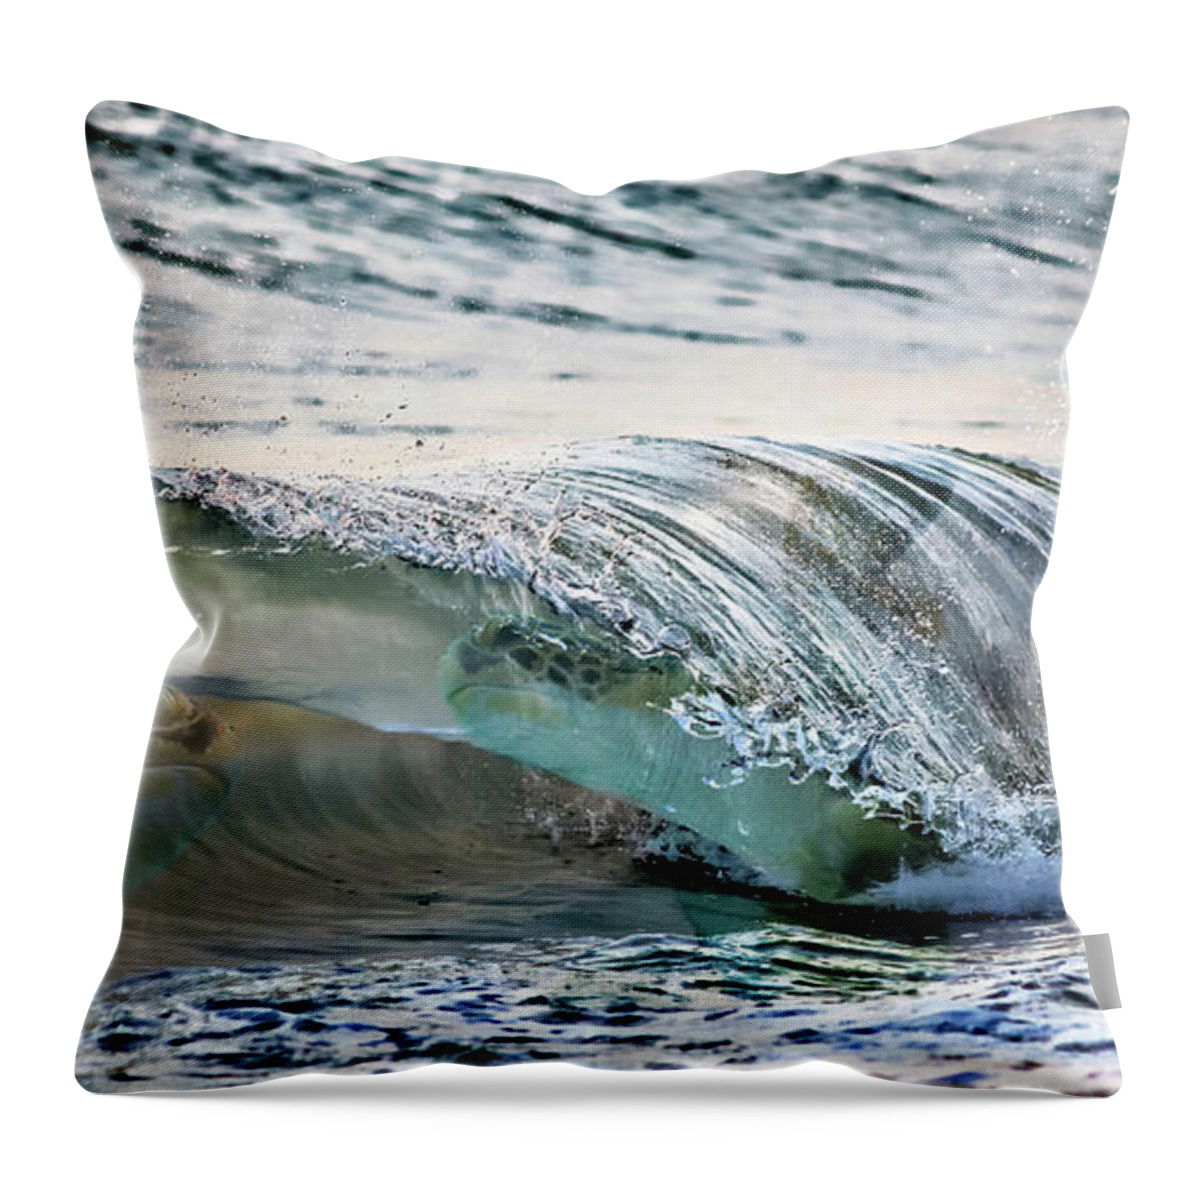 Sea Turtles Throw Pillow featuring the photograph Sea Turtles In The Waves by Barbara Chichester